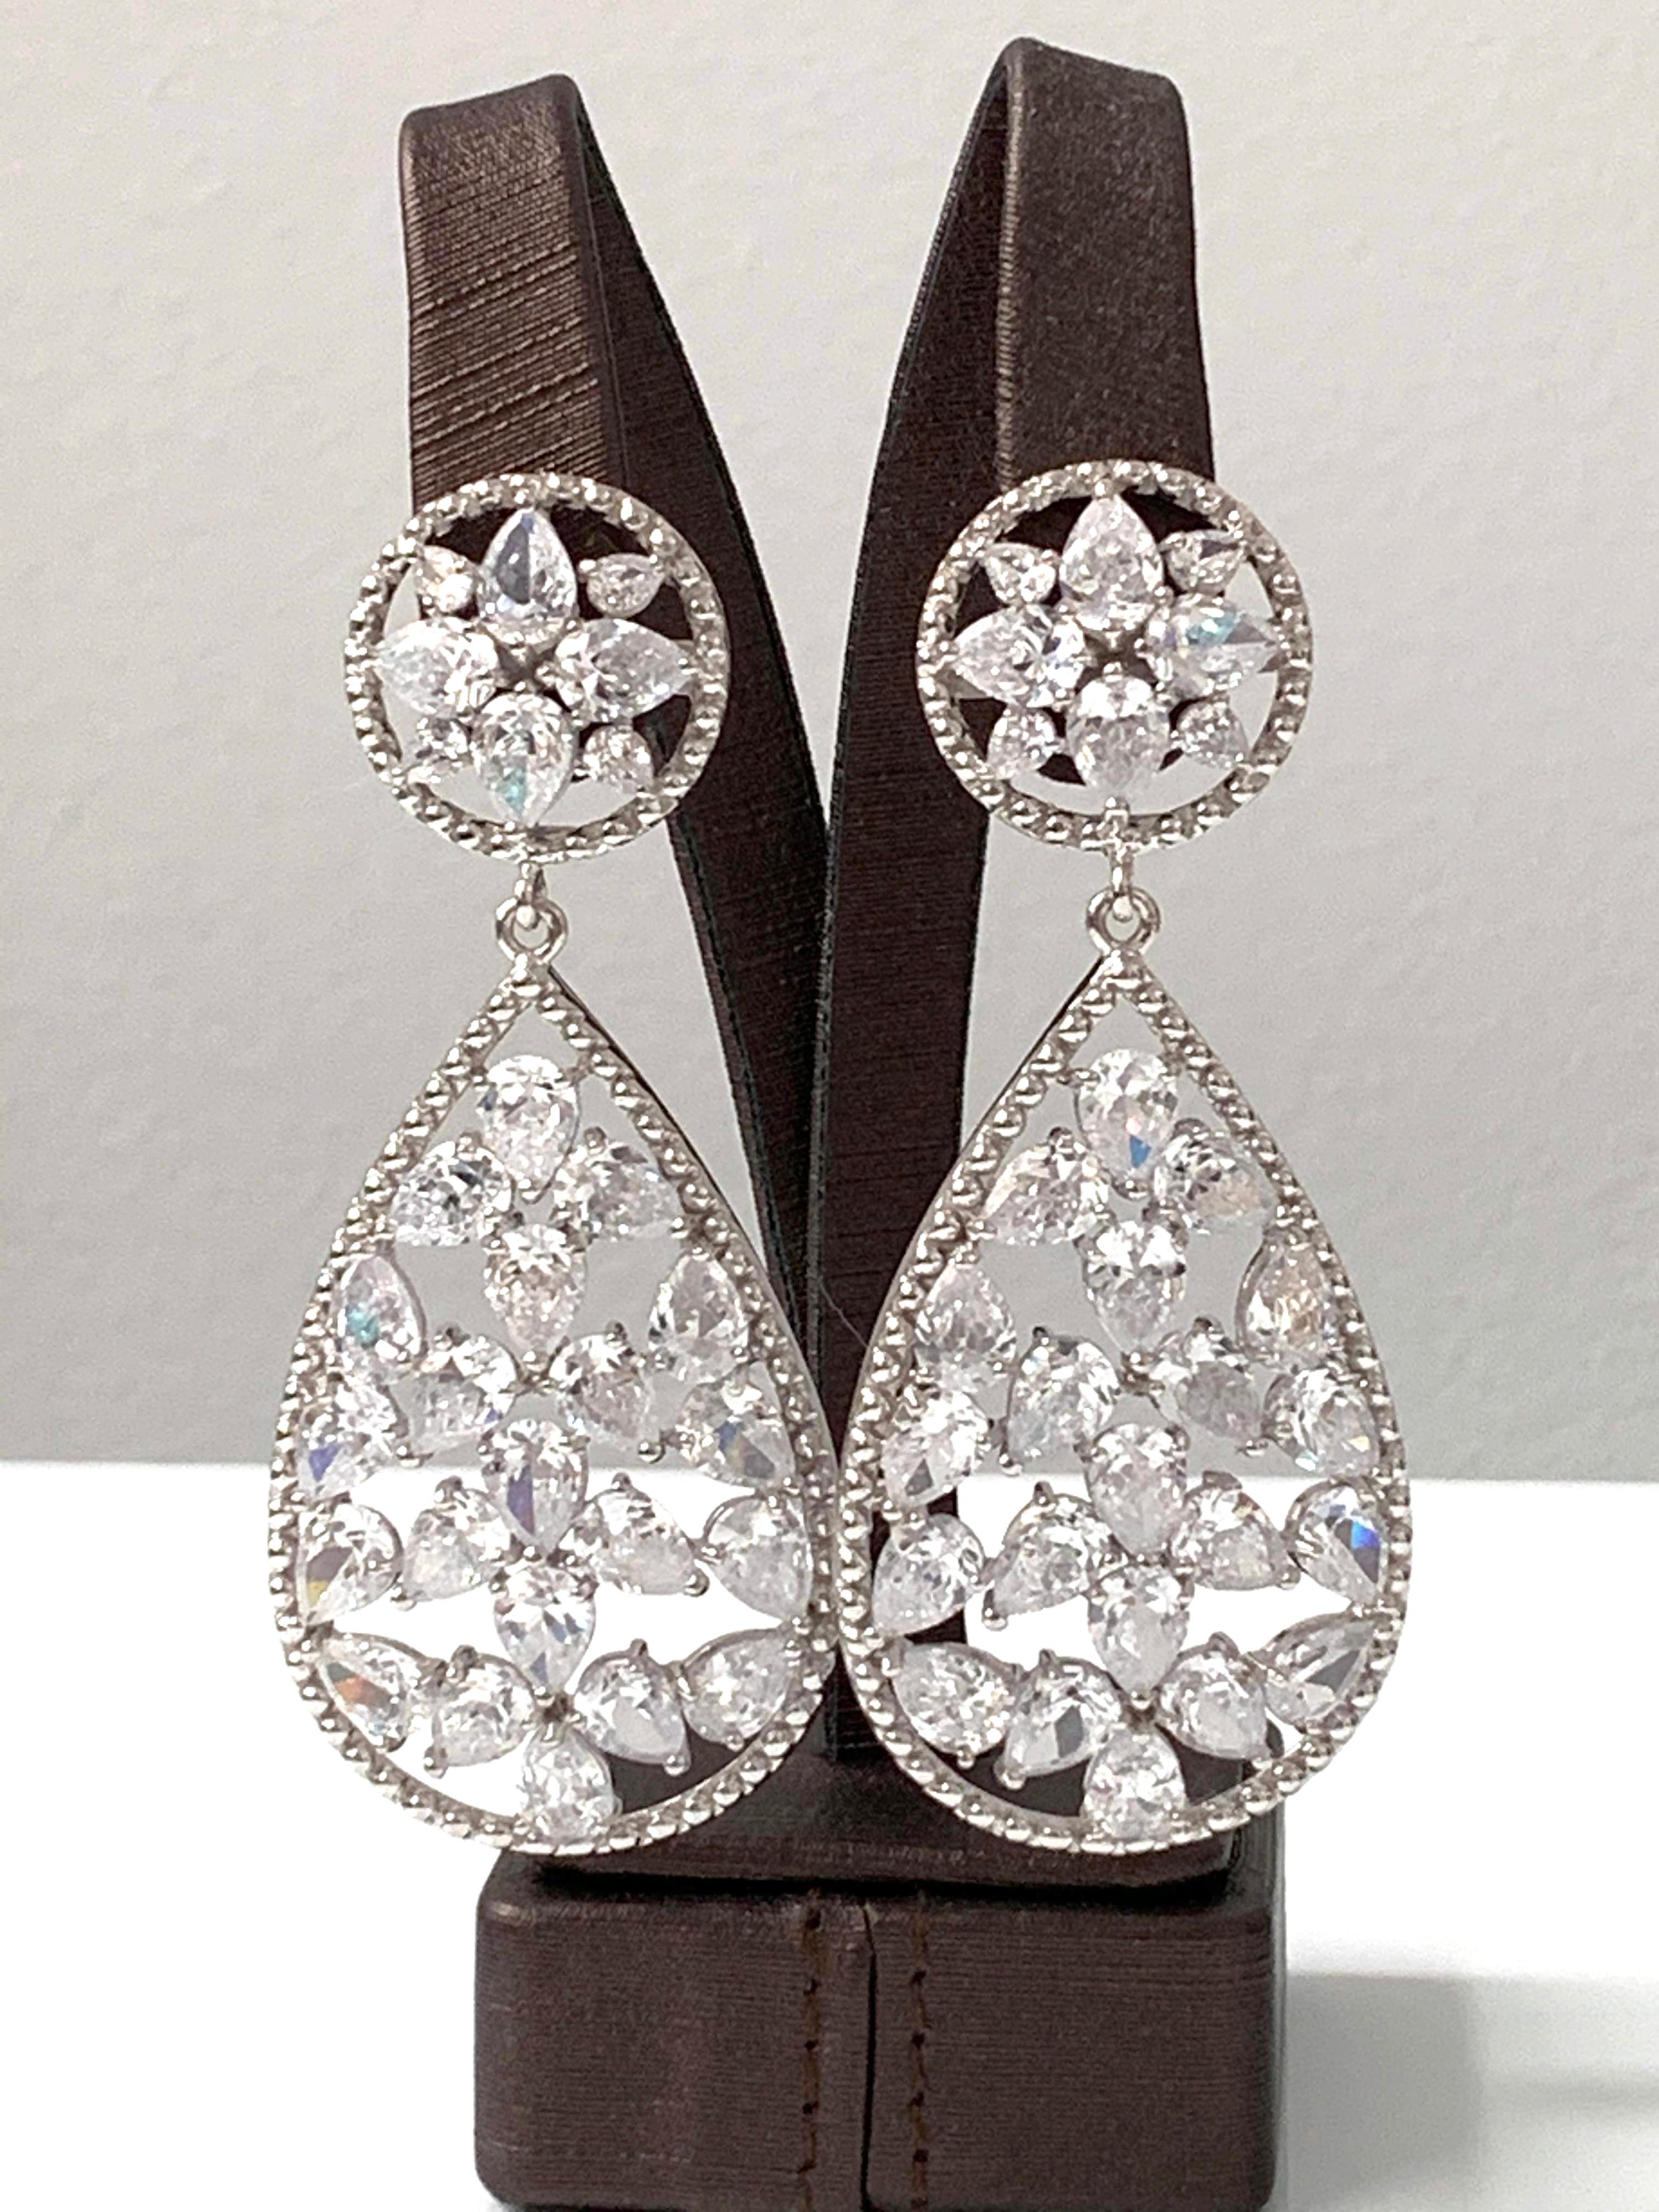 Stunning Pear Shape Drop Cubic Zirconia Earrings. AAA quality CZ showing a lot of fire!  Top part is 0.75